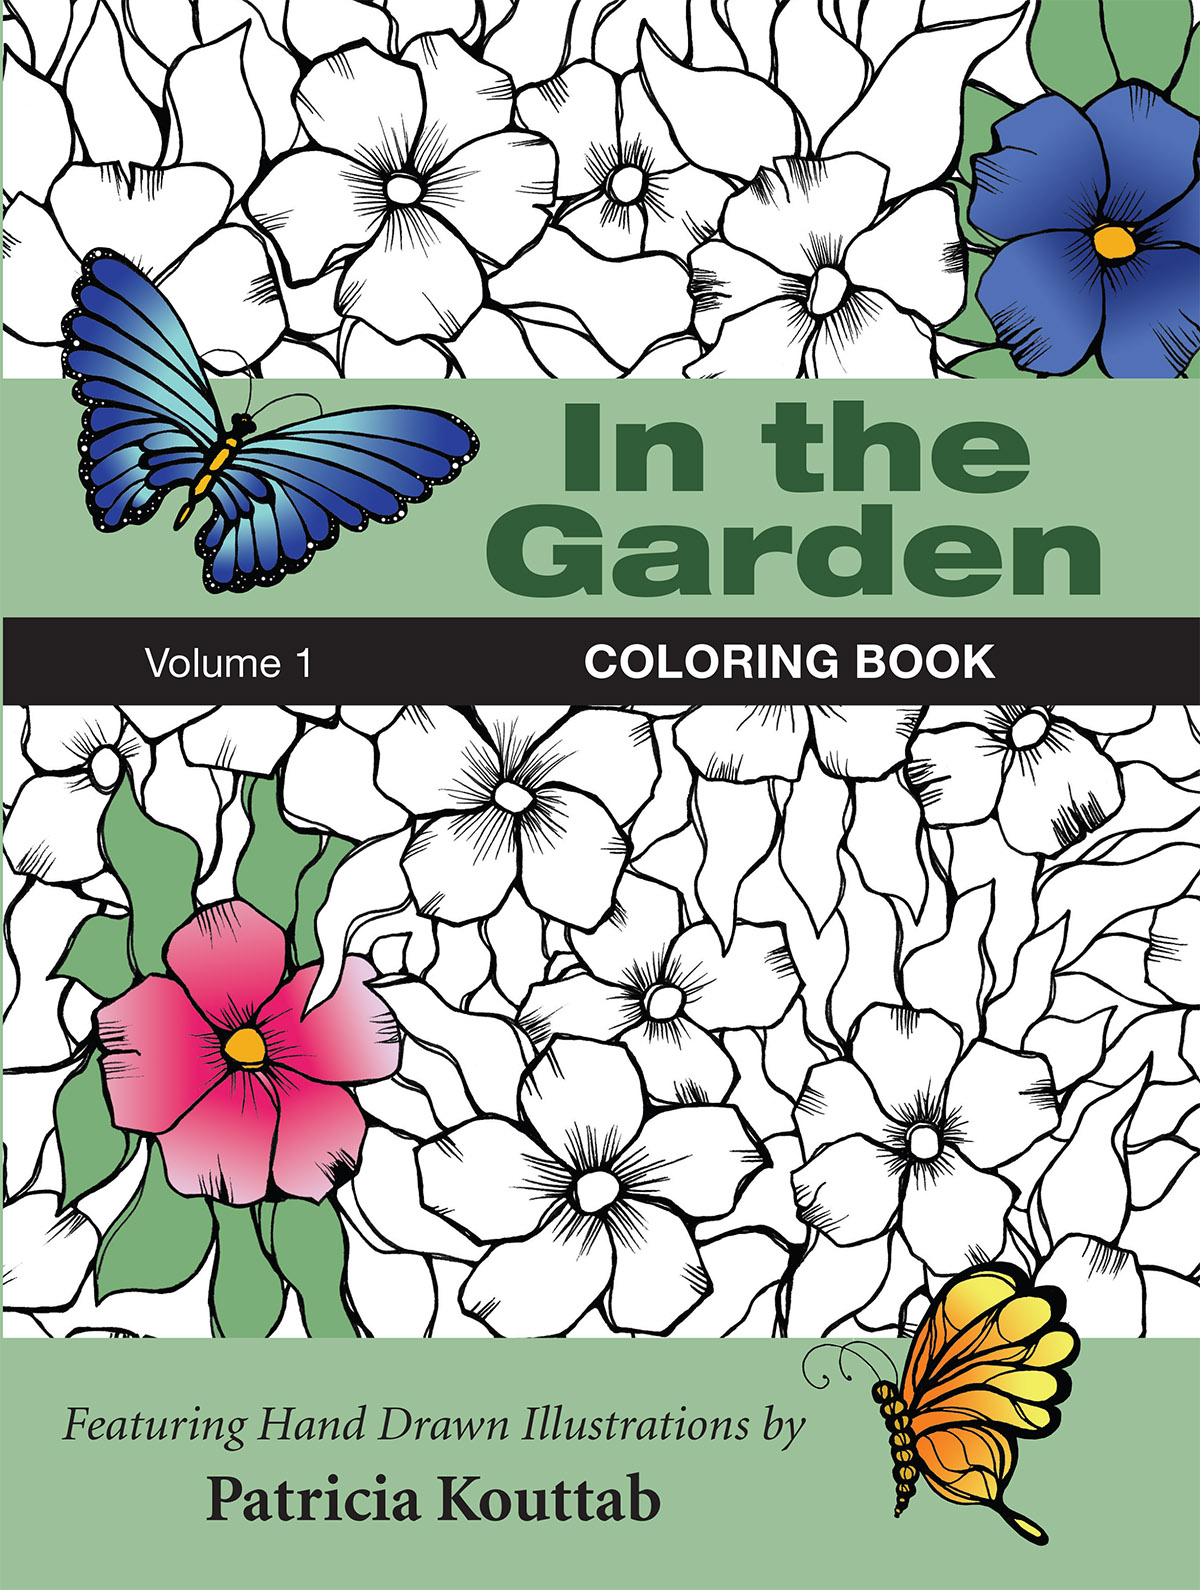 In the Garden Coloring Book Volume 1 by Patricia Kouttab